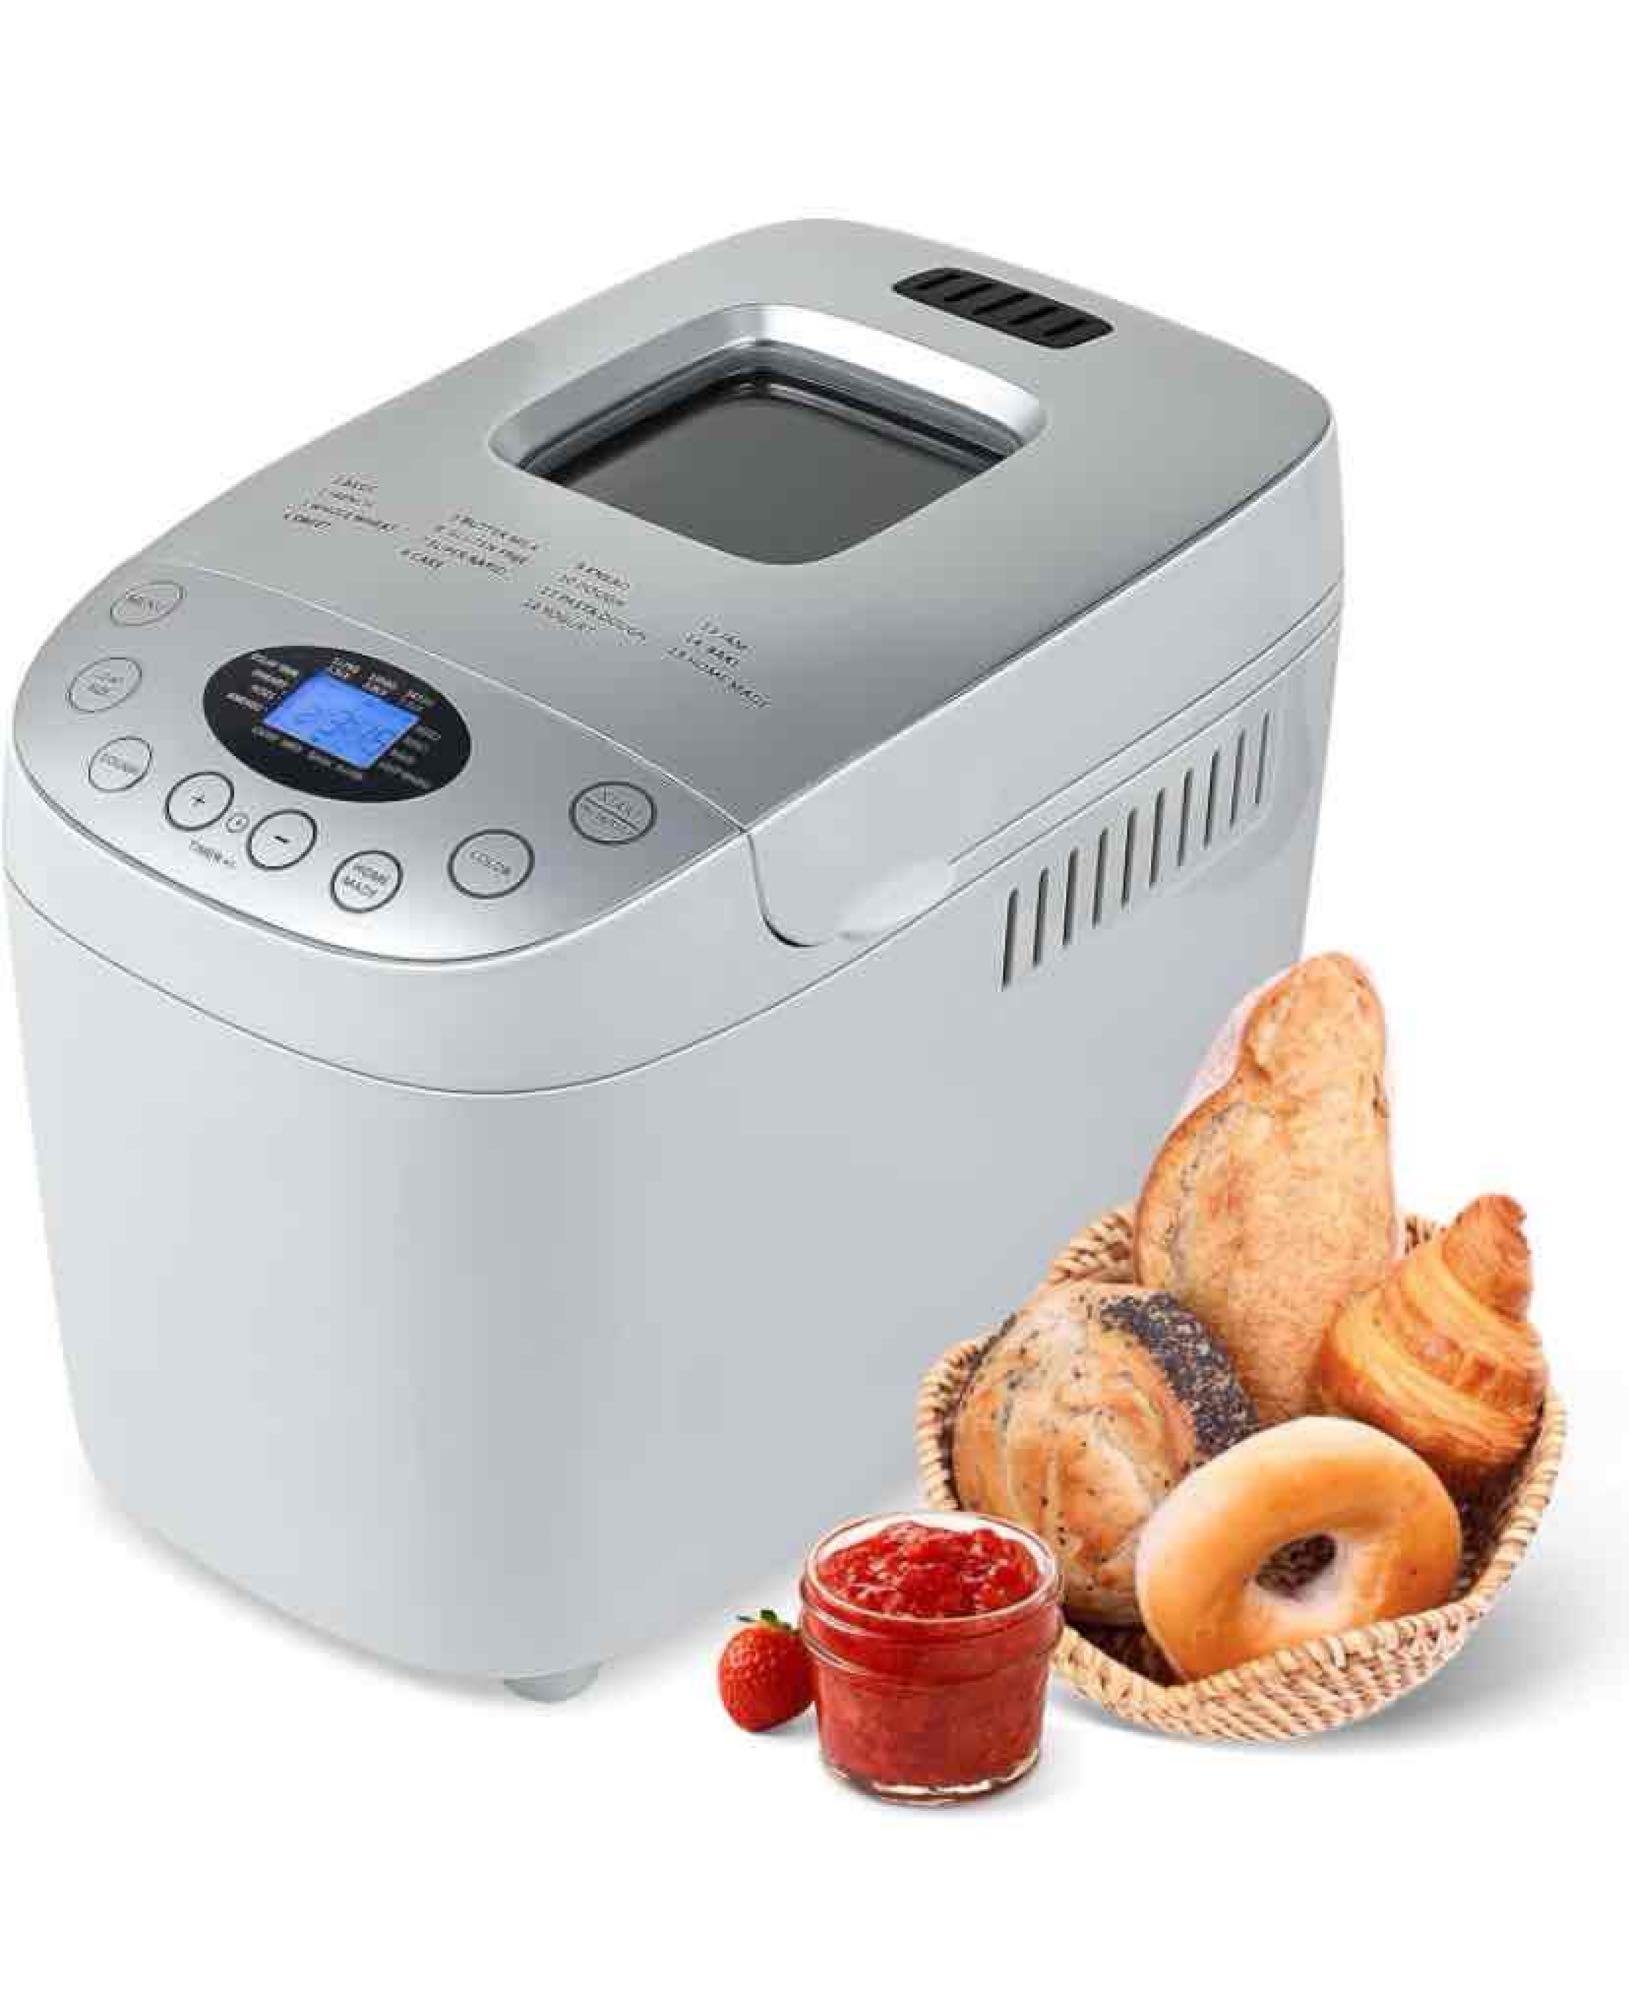 3.5LB Bread Maker Machine 15-in-1 Automatic Bread Machine with Dual Kneading Paddles Breadmaker with